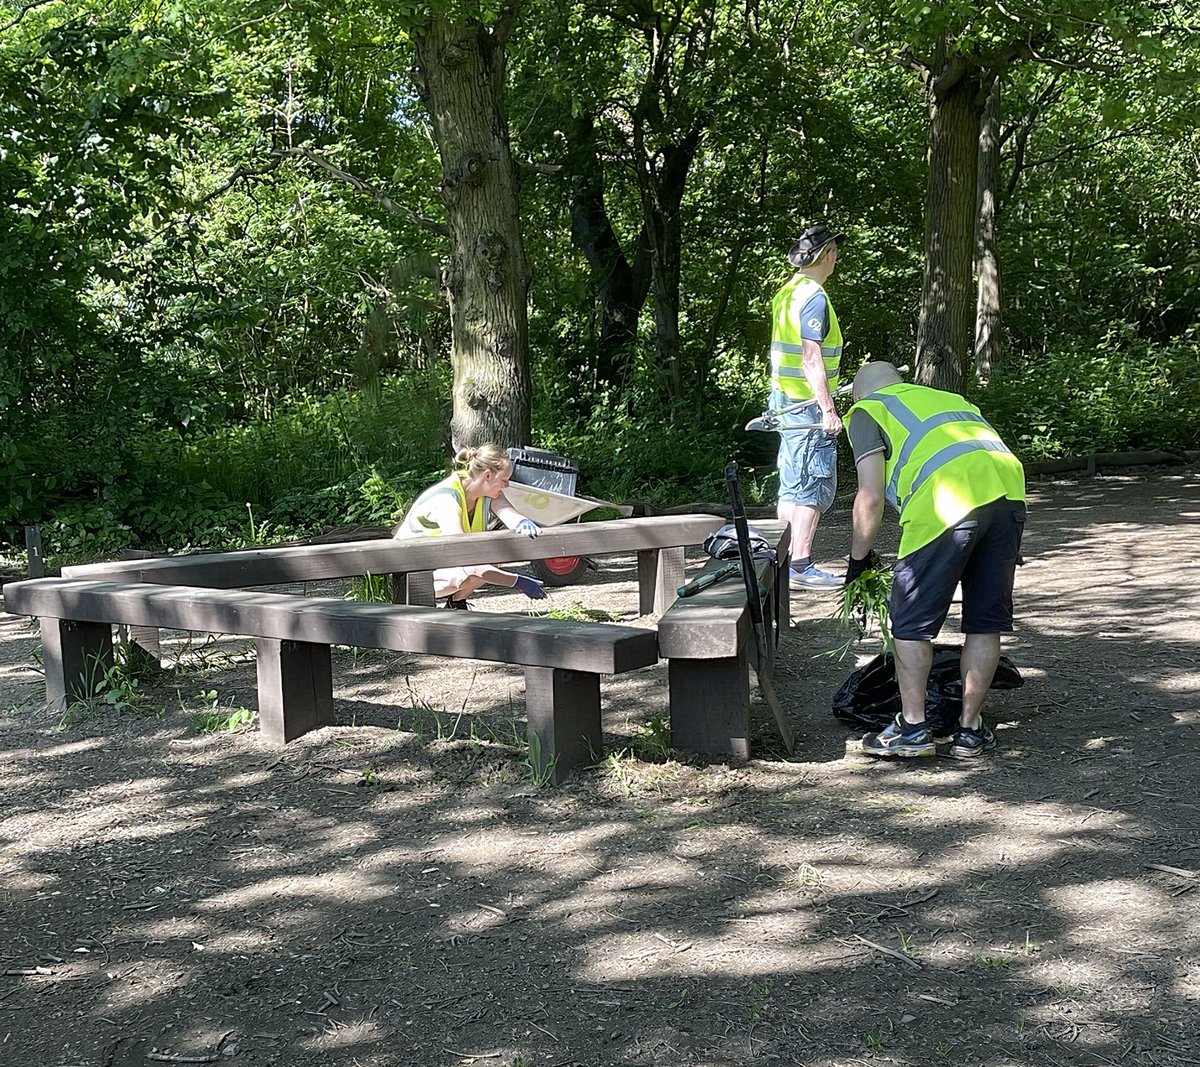 Our next Task Event will be on Saturday 4 Mayl 10.00 - 12.00 noon. We will meet at the Springwood Drive entrance to Chaddesden Wood. Please wear appropriate footwear & clothing and bring gardening gloves if you have them, we will provide the tools. @derby_parks @oakwoodderby